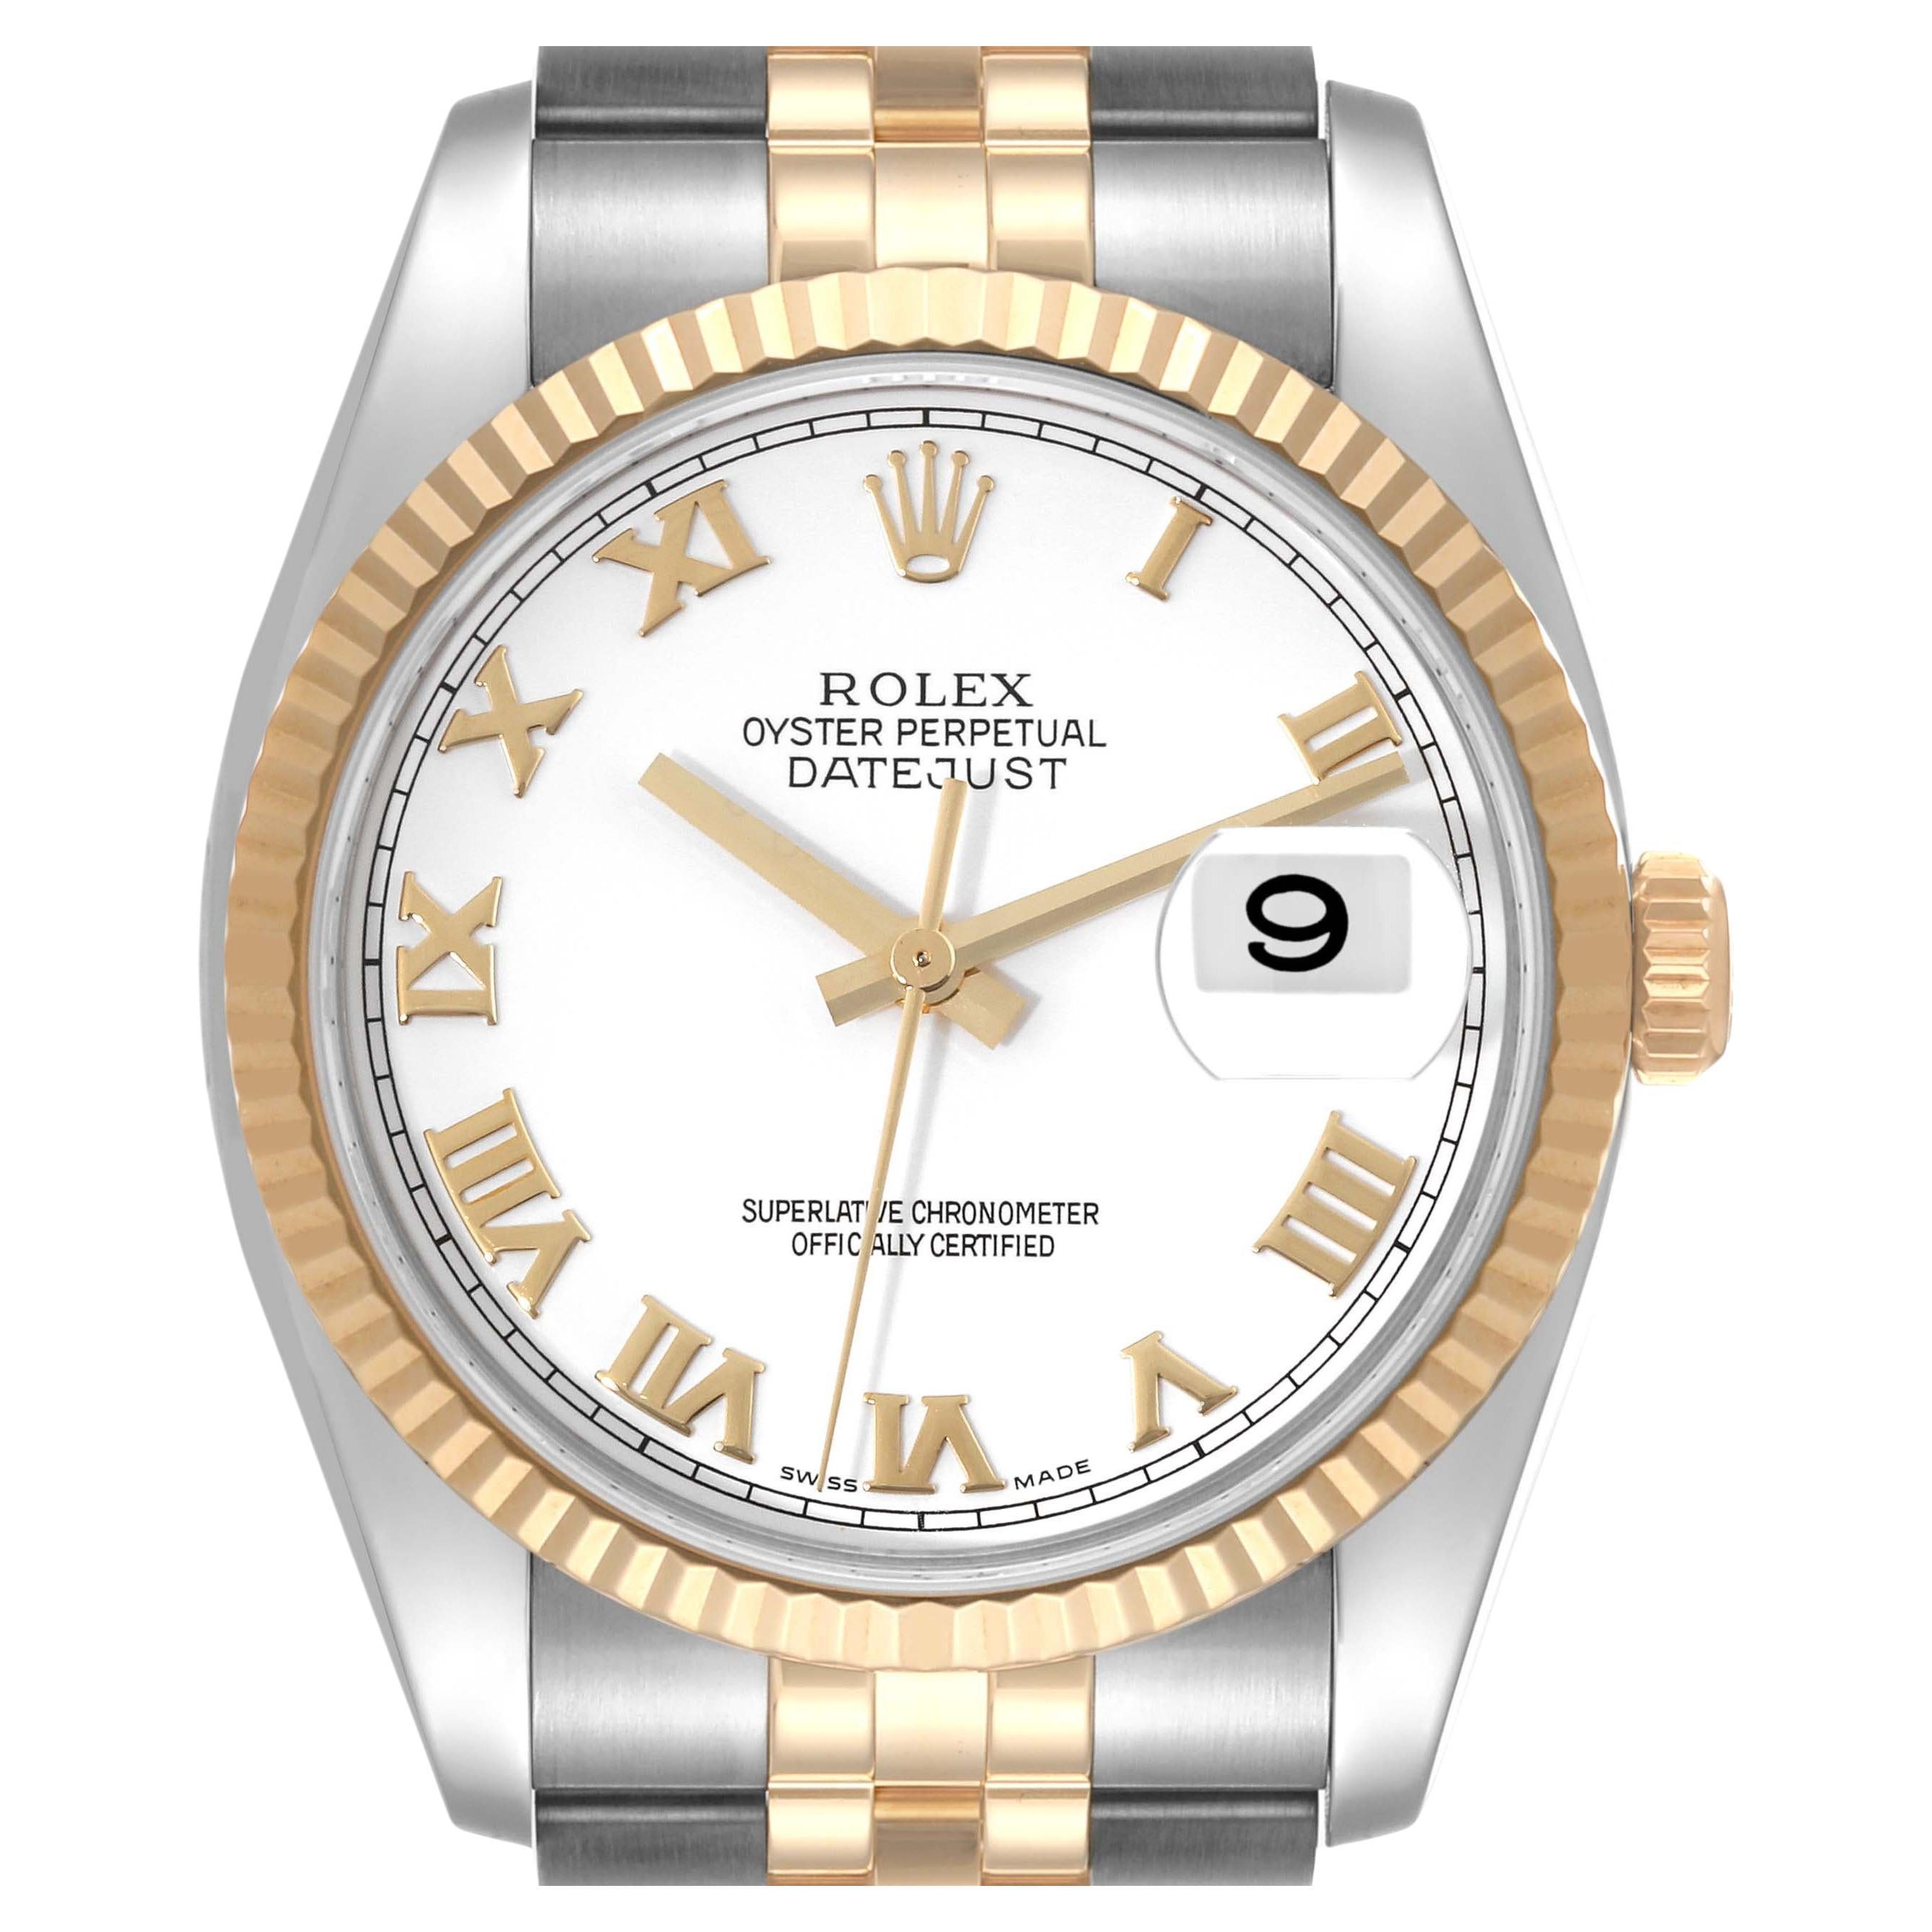 Rolex Datejust Steel Yellow Gold White Dial Mens Watch 116233 Box Card